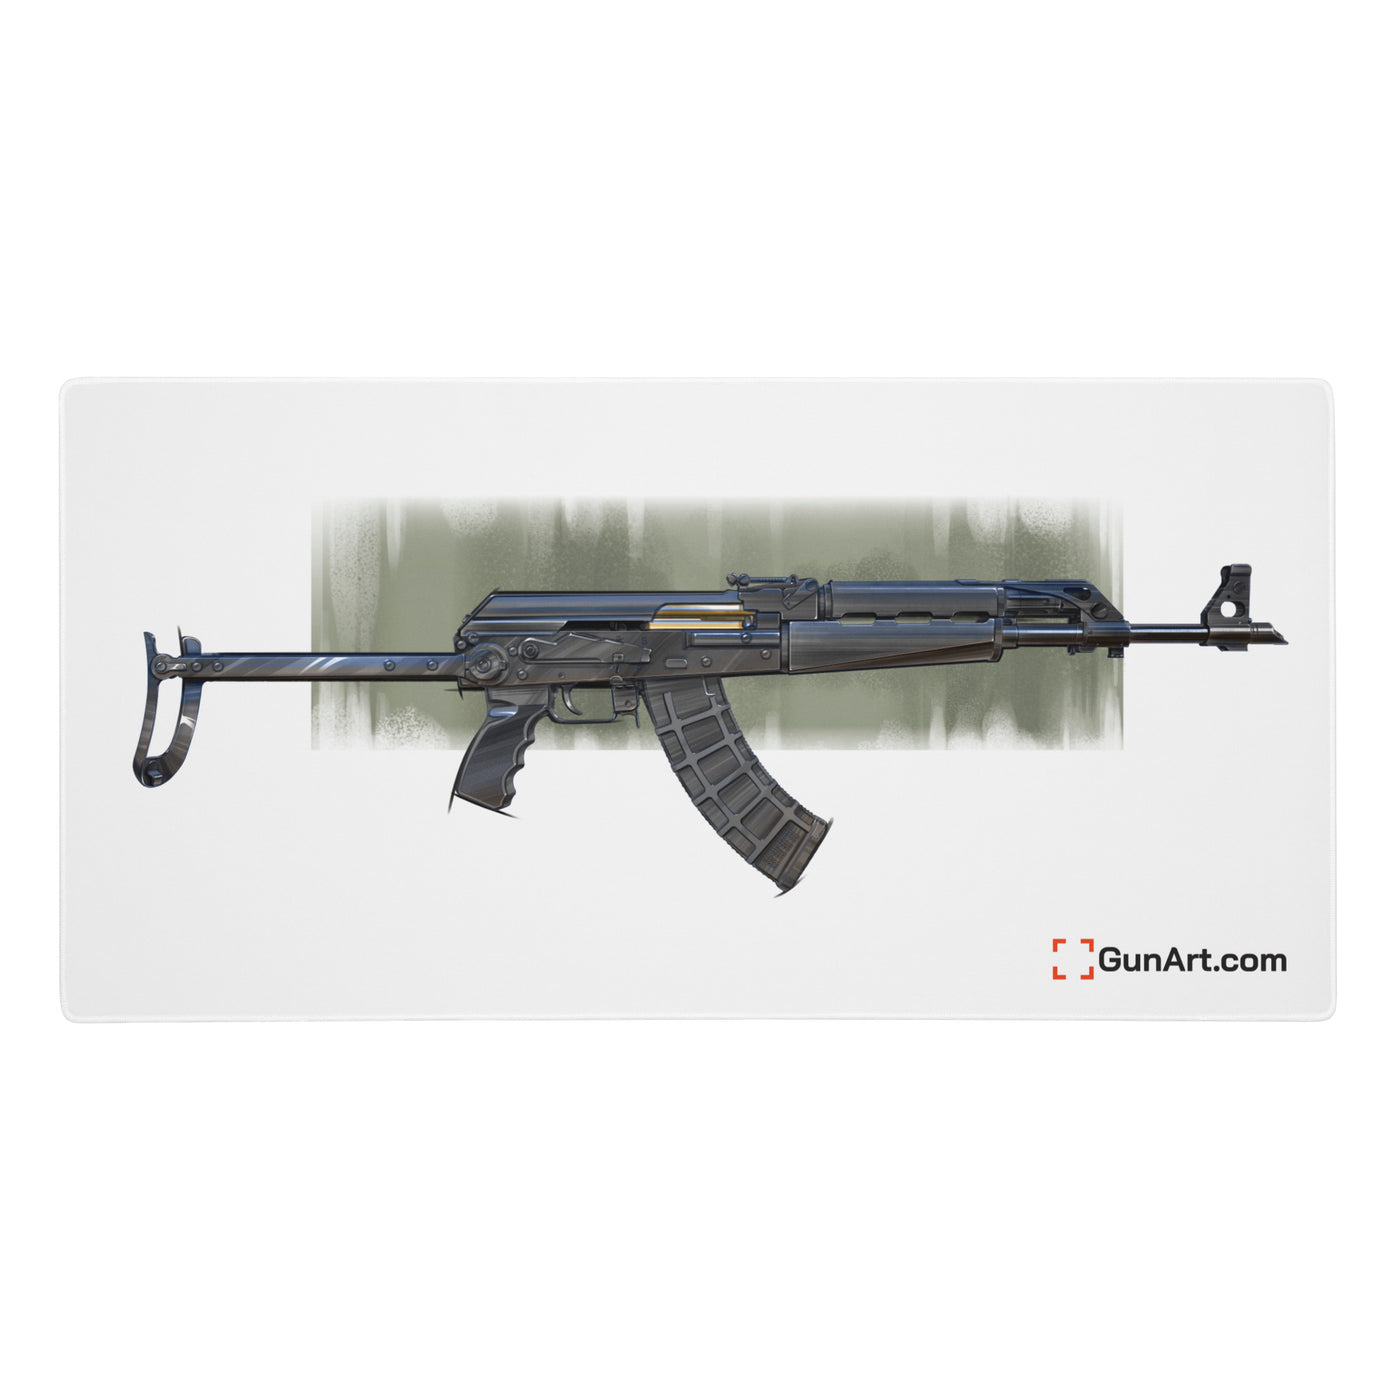 The Paratrooper / AK-47 Underfolder Gaming Mouse Pad - White Background